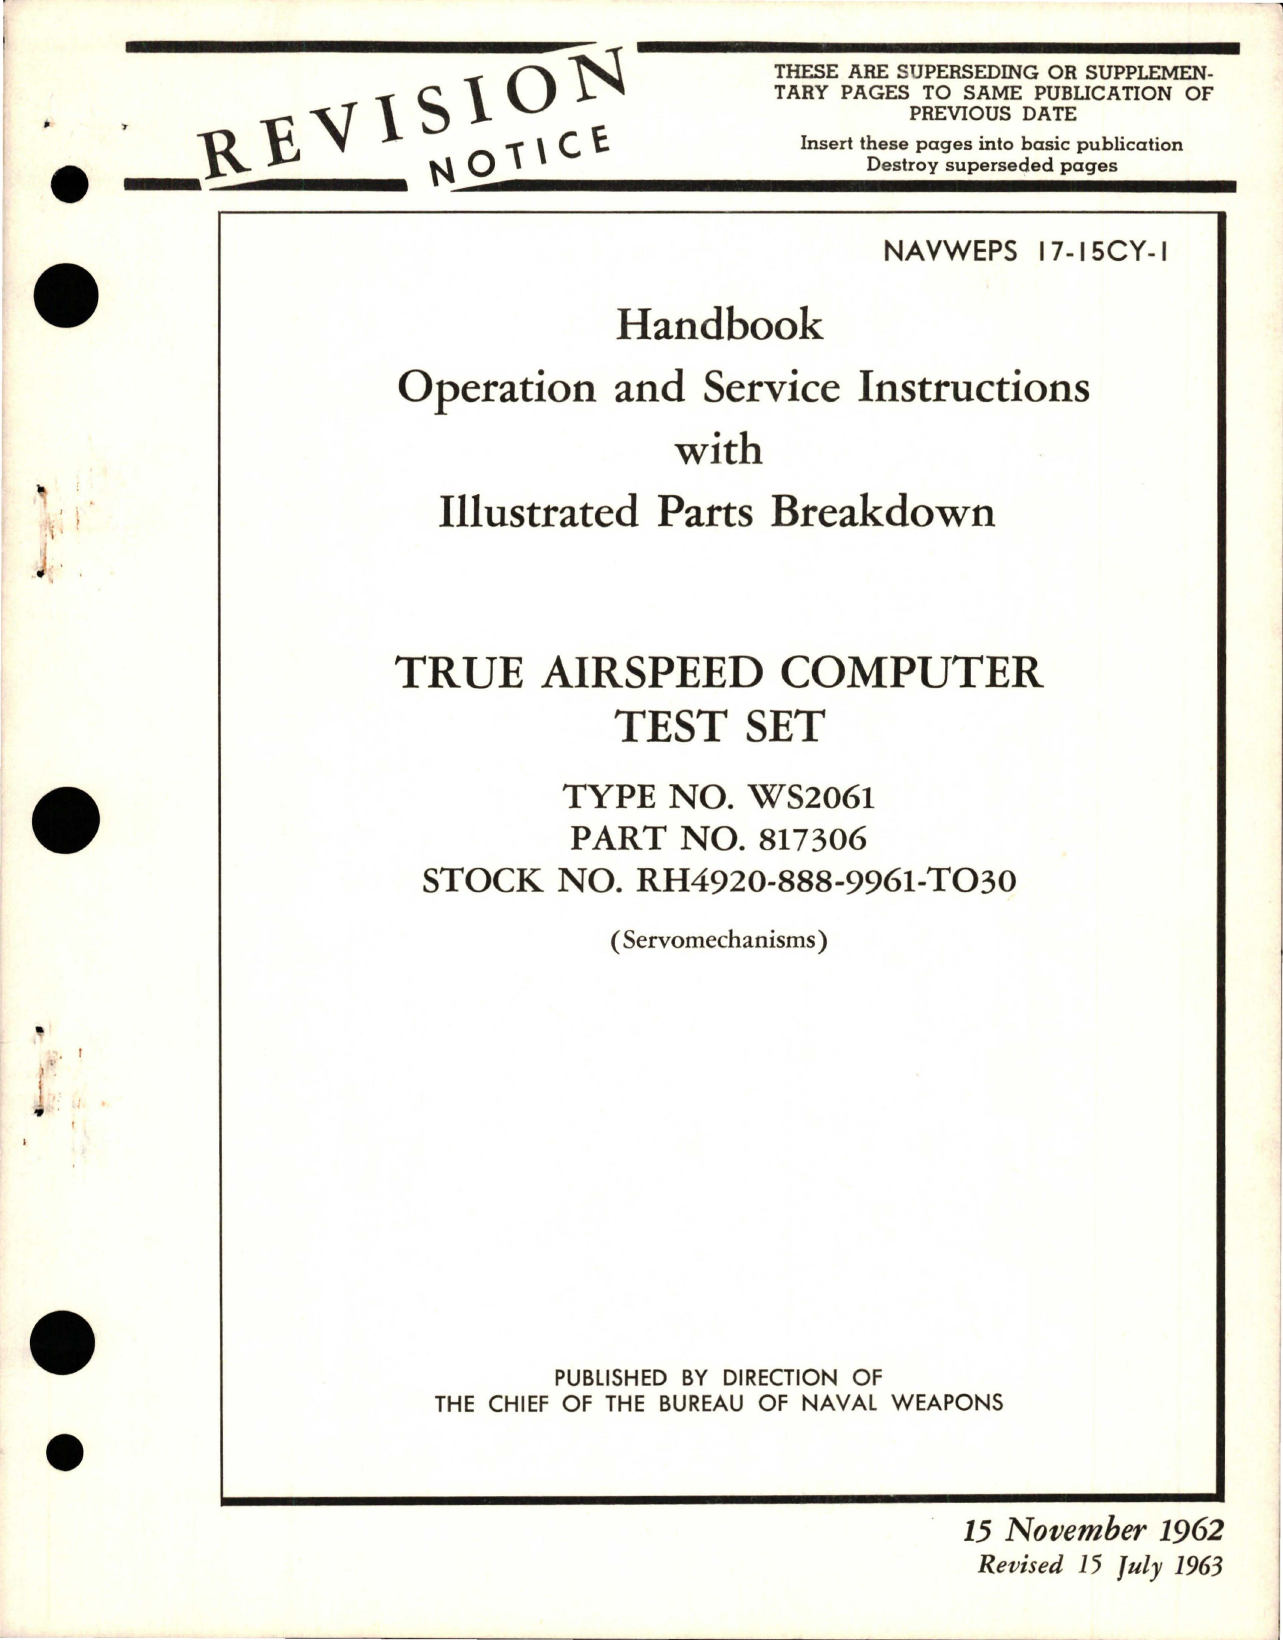 Sample page 1 from AirCorps Library document: Operation, Service Instructions and Illustrated Parts Breakdown for True Airspeed Computer Test Set - Type WS2061 - Part 817306 